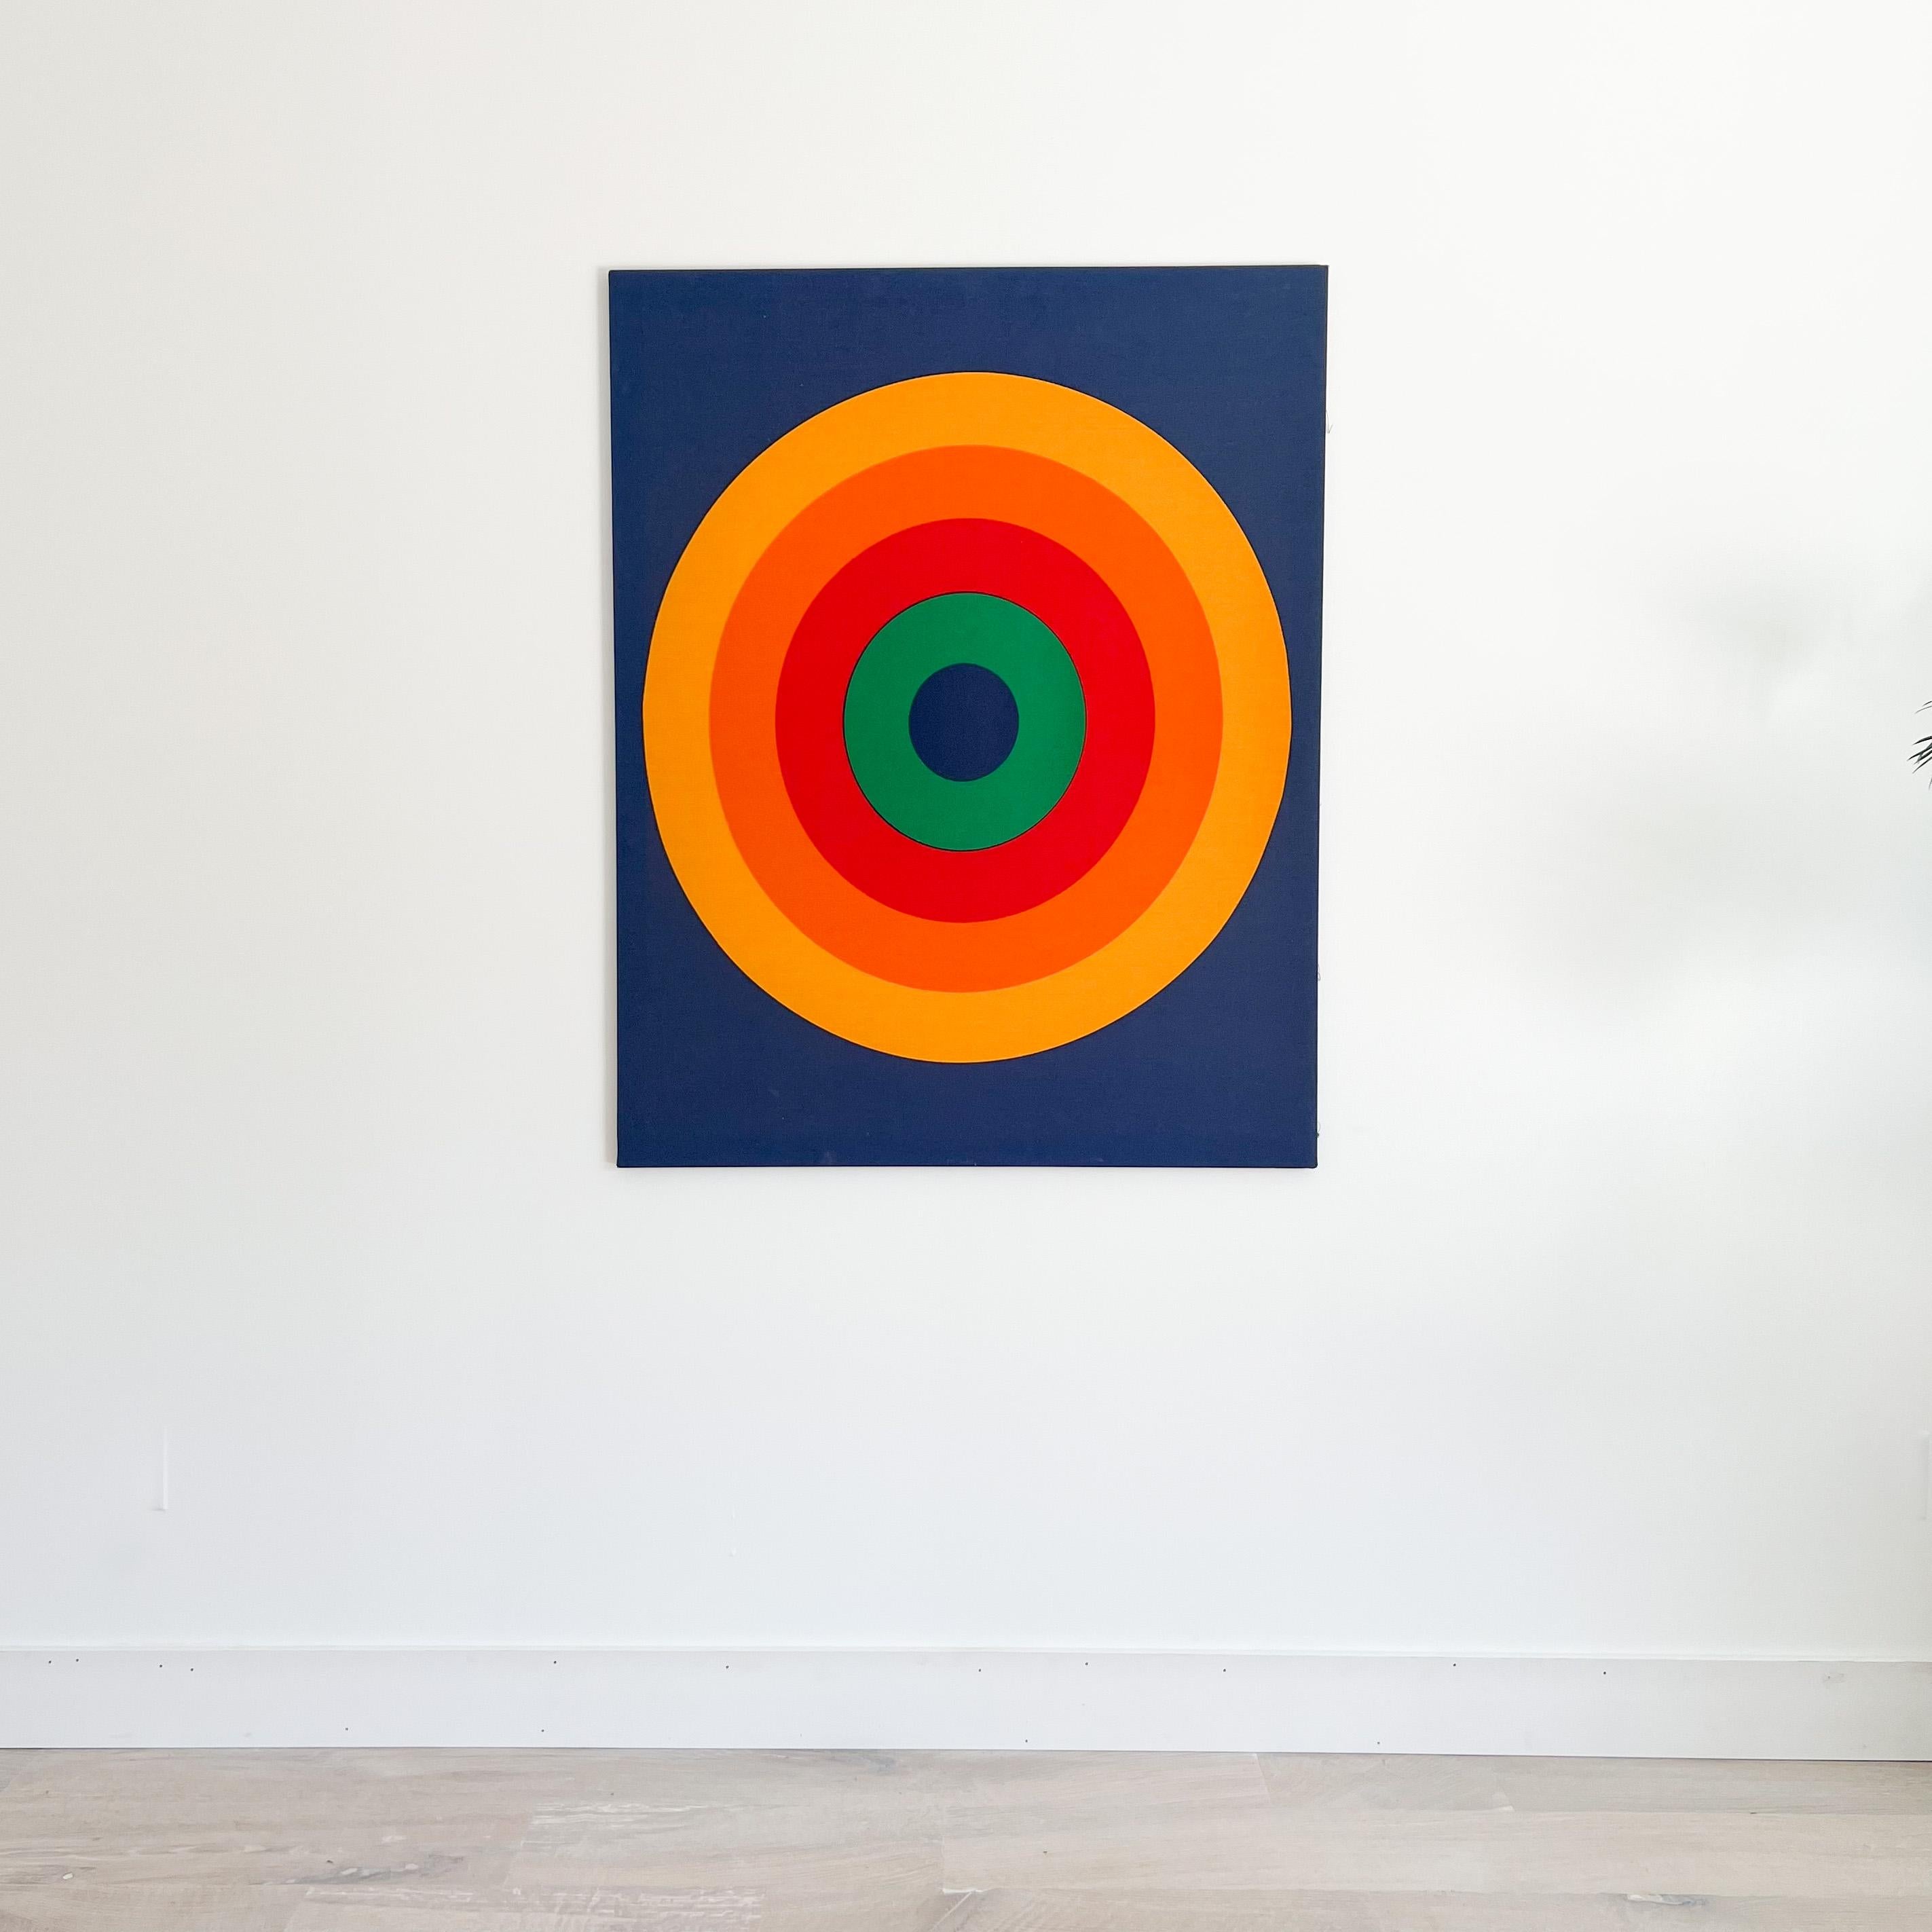 Very cool printed textile wall hanging on canvas. Stamped Finlayson in Finland on the back. Overall very good condition with minimal discoloration/wear (see up close photos). In the style of Verner Panton with the rainbow bulls eye theme. This wall